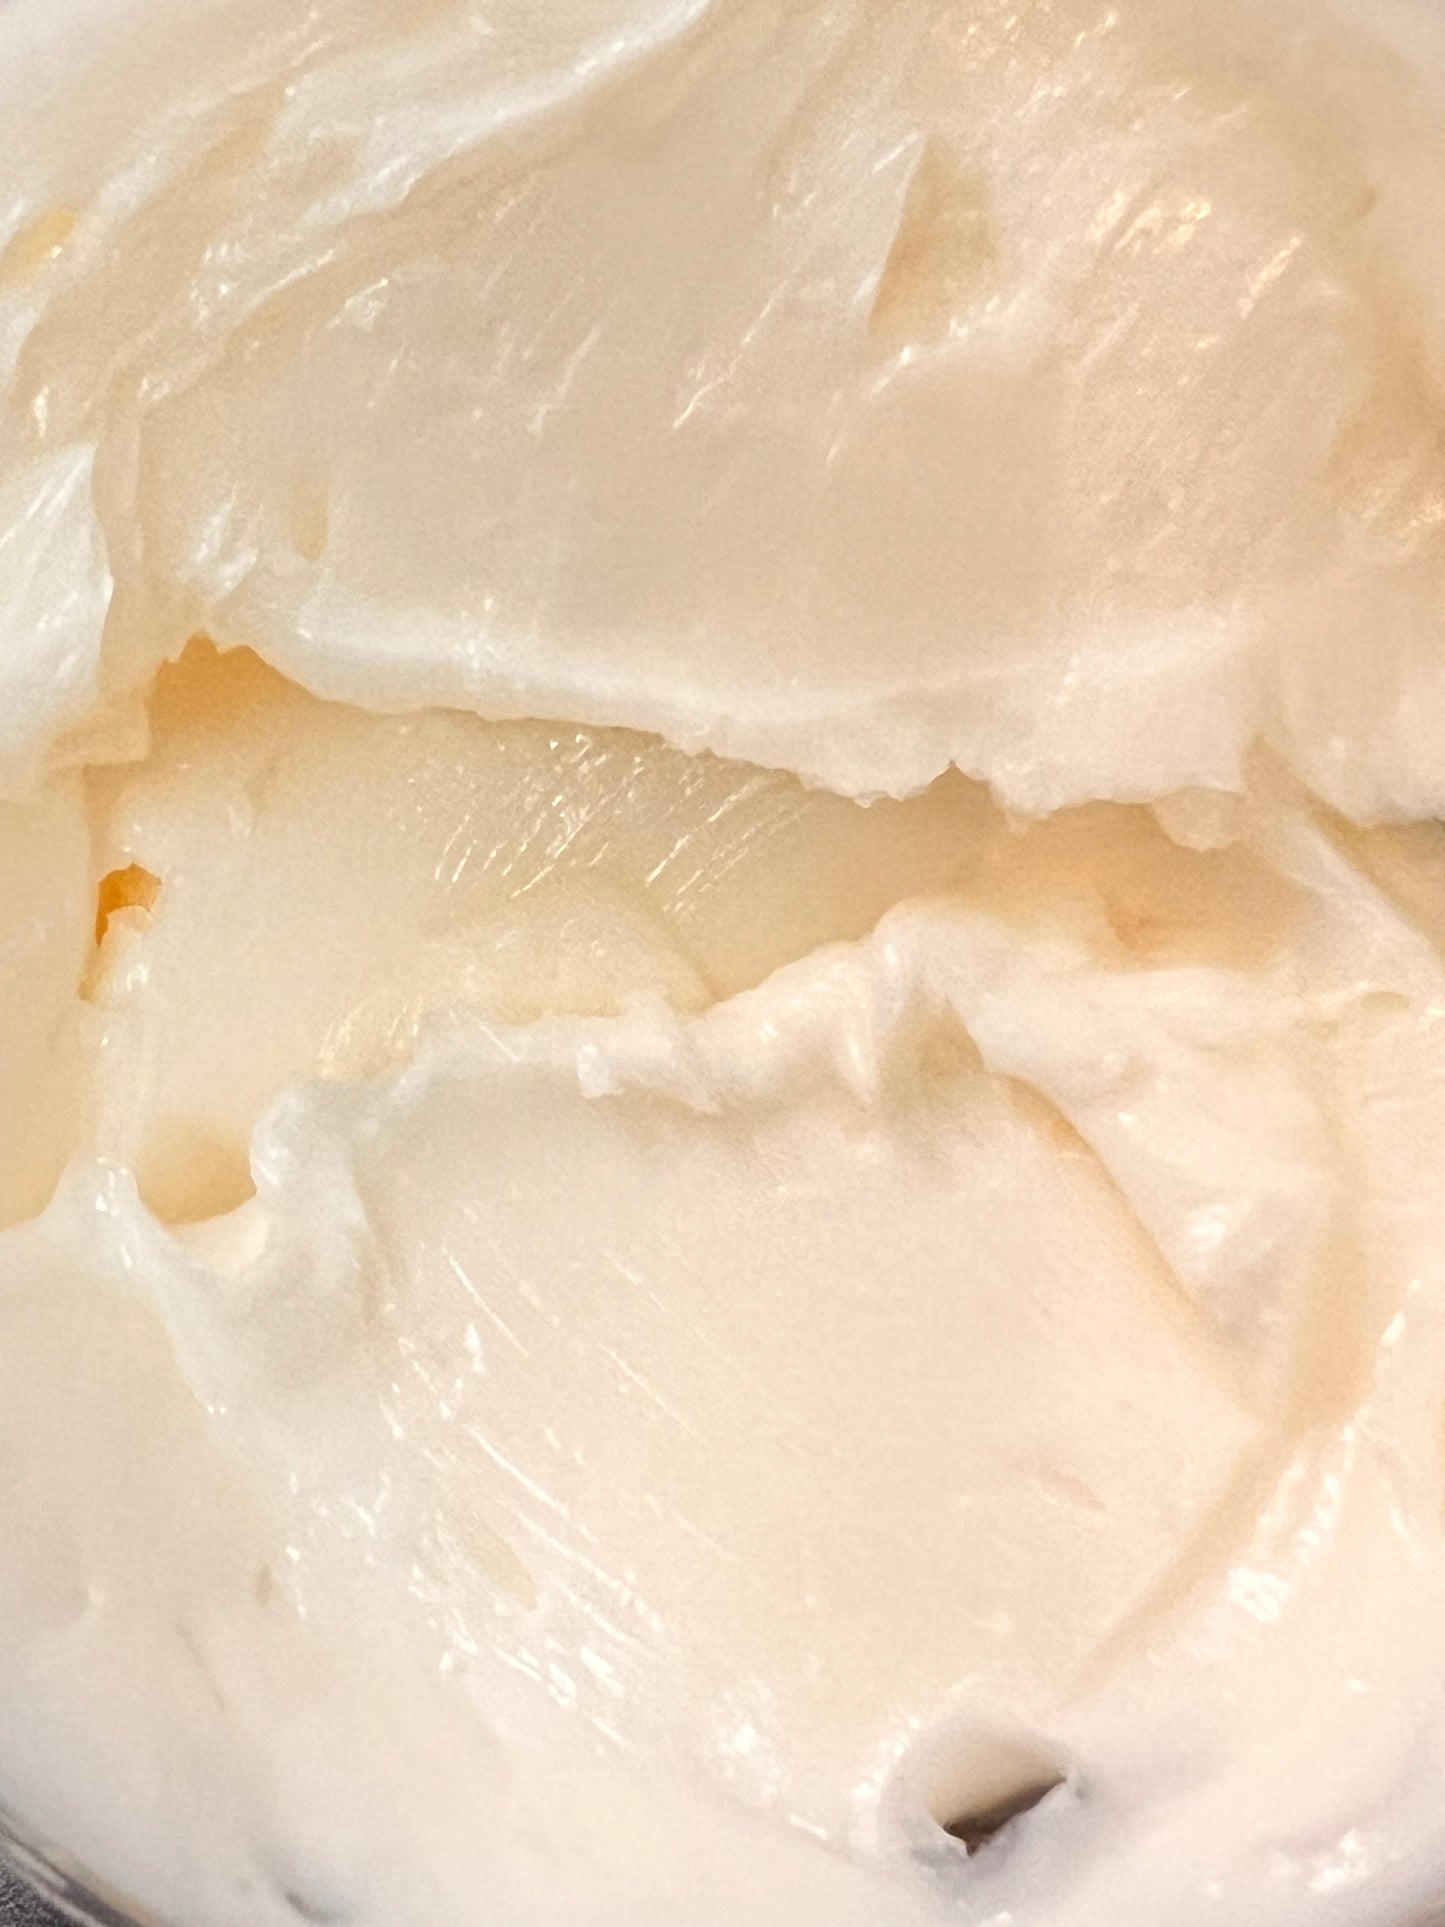 Skin Relief Butter